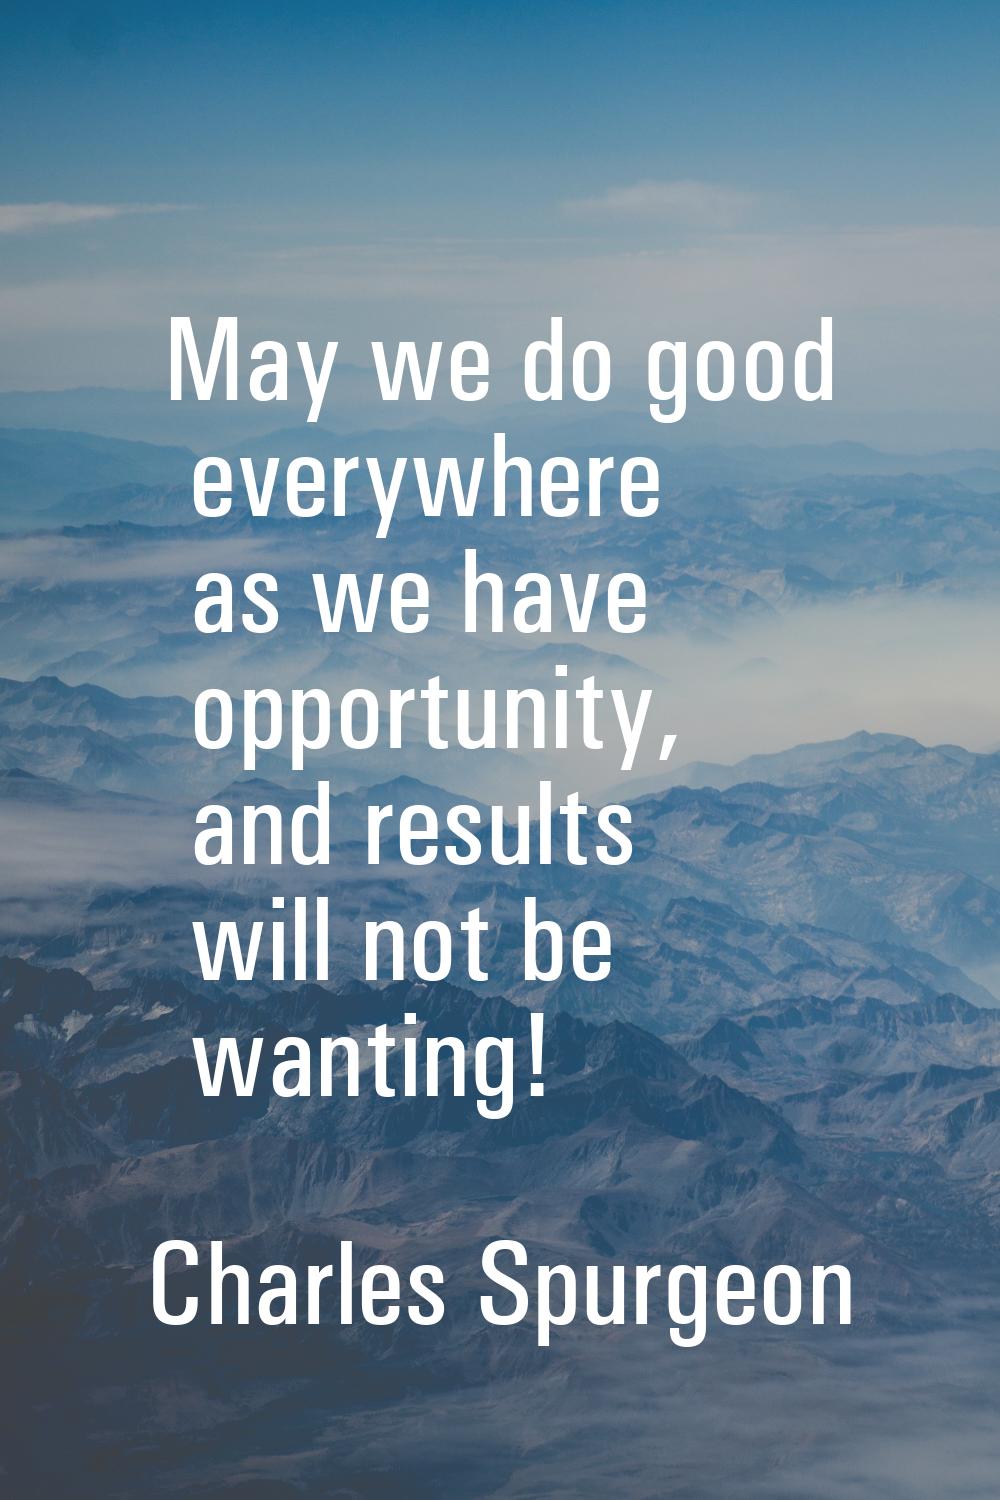 May we do good everywhere as we have opportunity, and results will not be wanting!